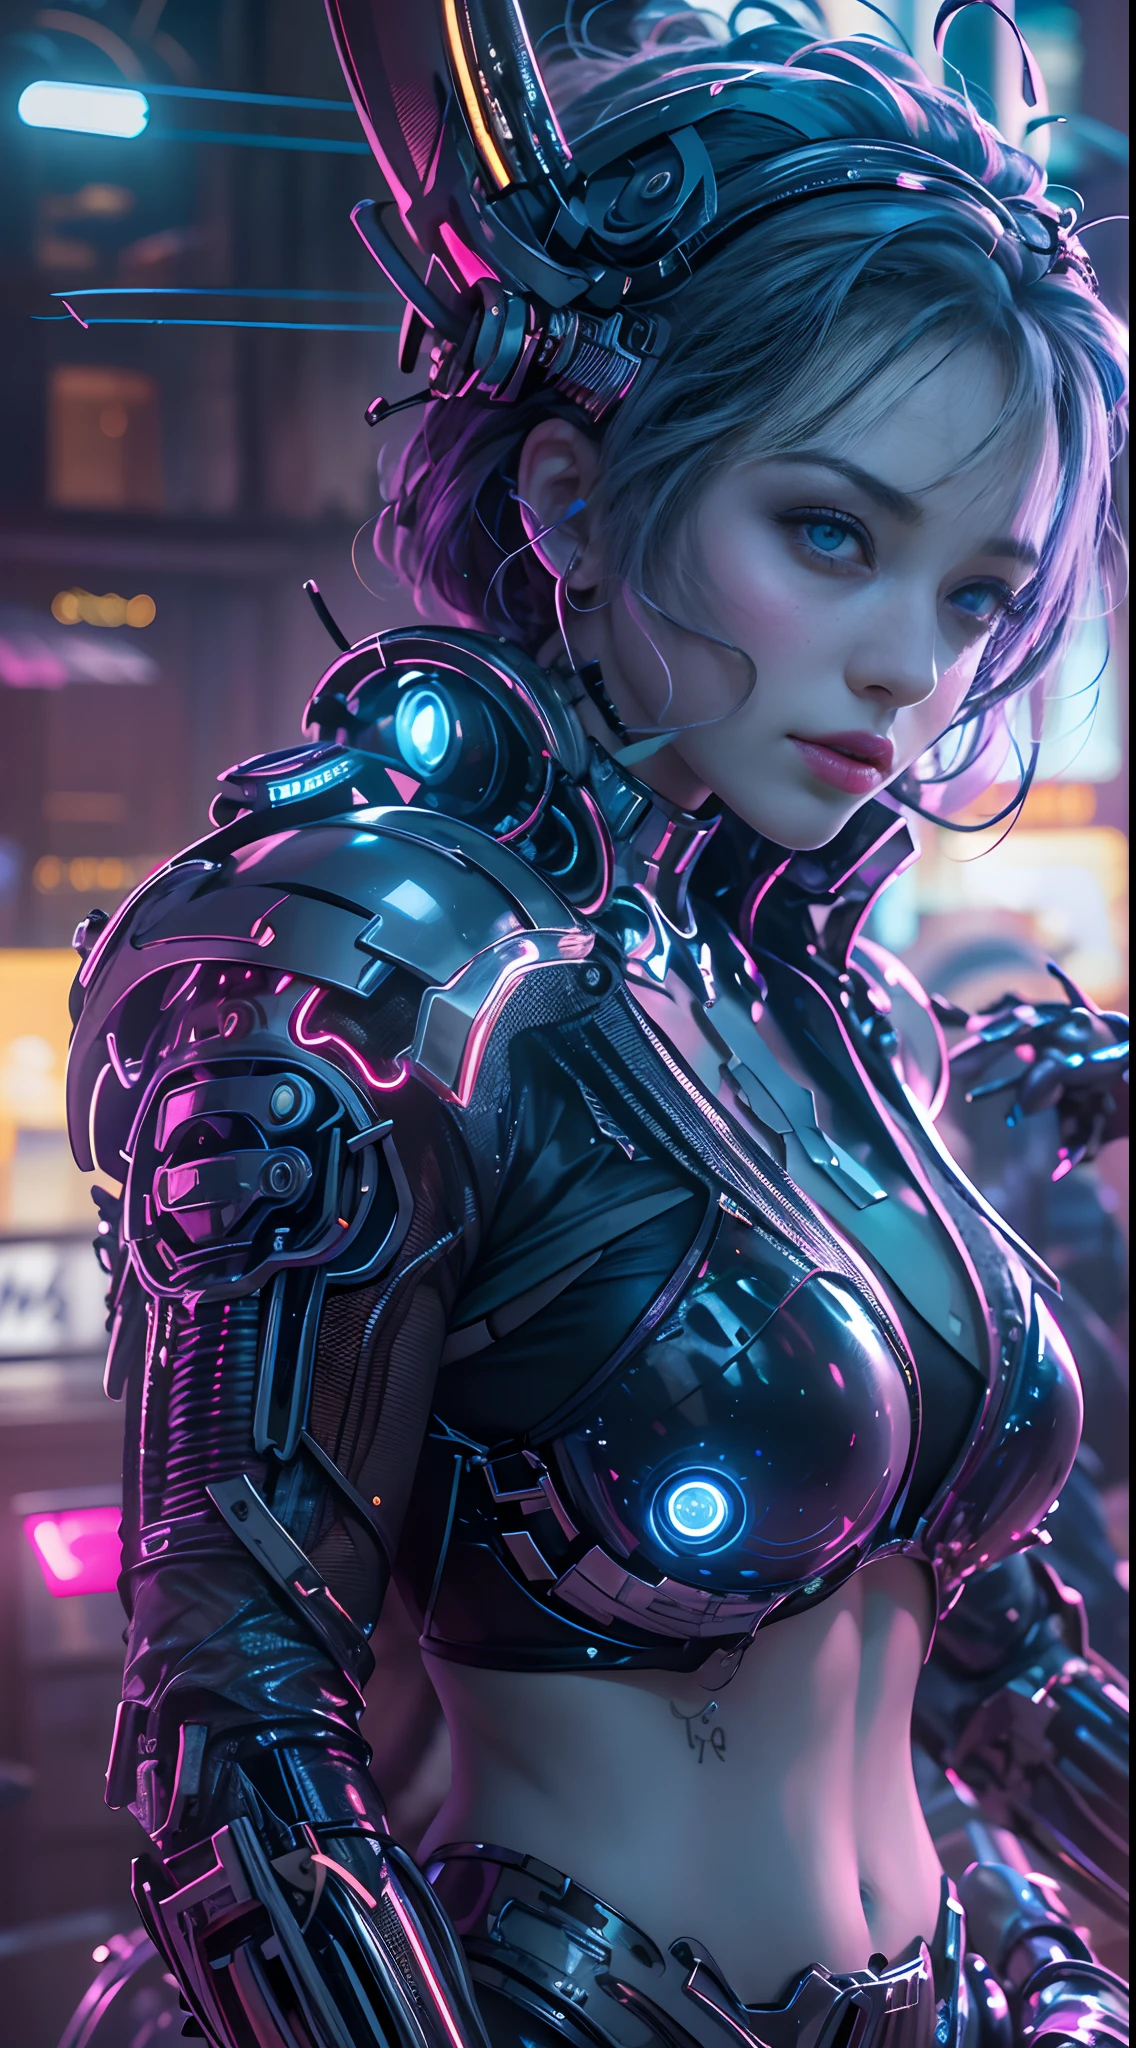 unreal engine:1.4,UHD,La Best Quality:1.4, photorealistic:1.4, skin texture:1.4, Masterpiece:1.8,first work, Best Quality, 1girl, Ives Girl, mecha, beautiful  lighting, (neon light: 1.2), (evening: 1.5), "first work, Best Quality, 1chica, Full length portrait, pose sensual, ojos bluees, multicolored hair+the payment:1.3+rosado:1.3+blue:1.3, Sculpted legs and tempting curves, full breasts, Beautiful face, many drops of water, clouds, twilights, Open floor plan, watercolor, neon light:1.2, evening:1.5, mecha, beautiful  lighting, Bright neon light: 1.2, unforgettable mysterious night: 1.5",,beautiful fine hands